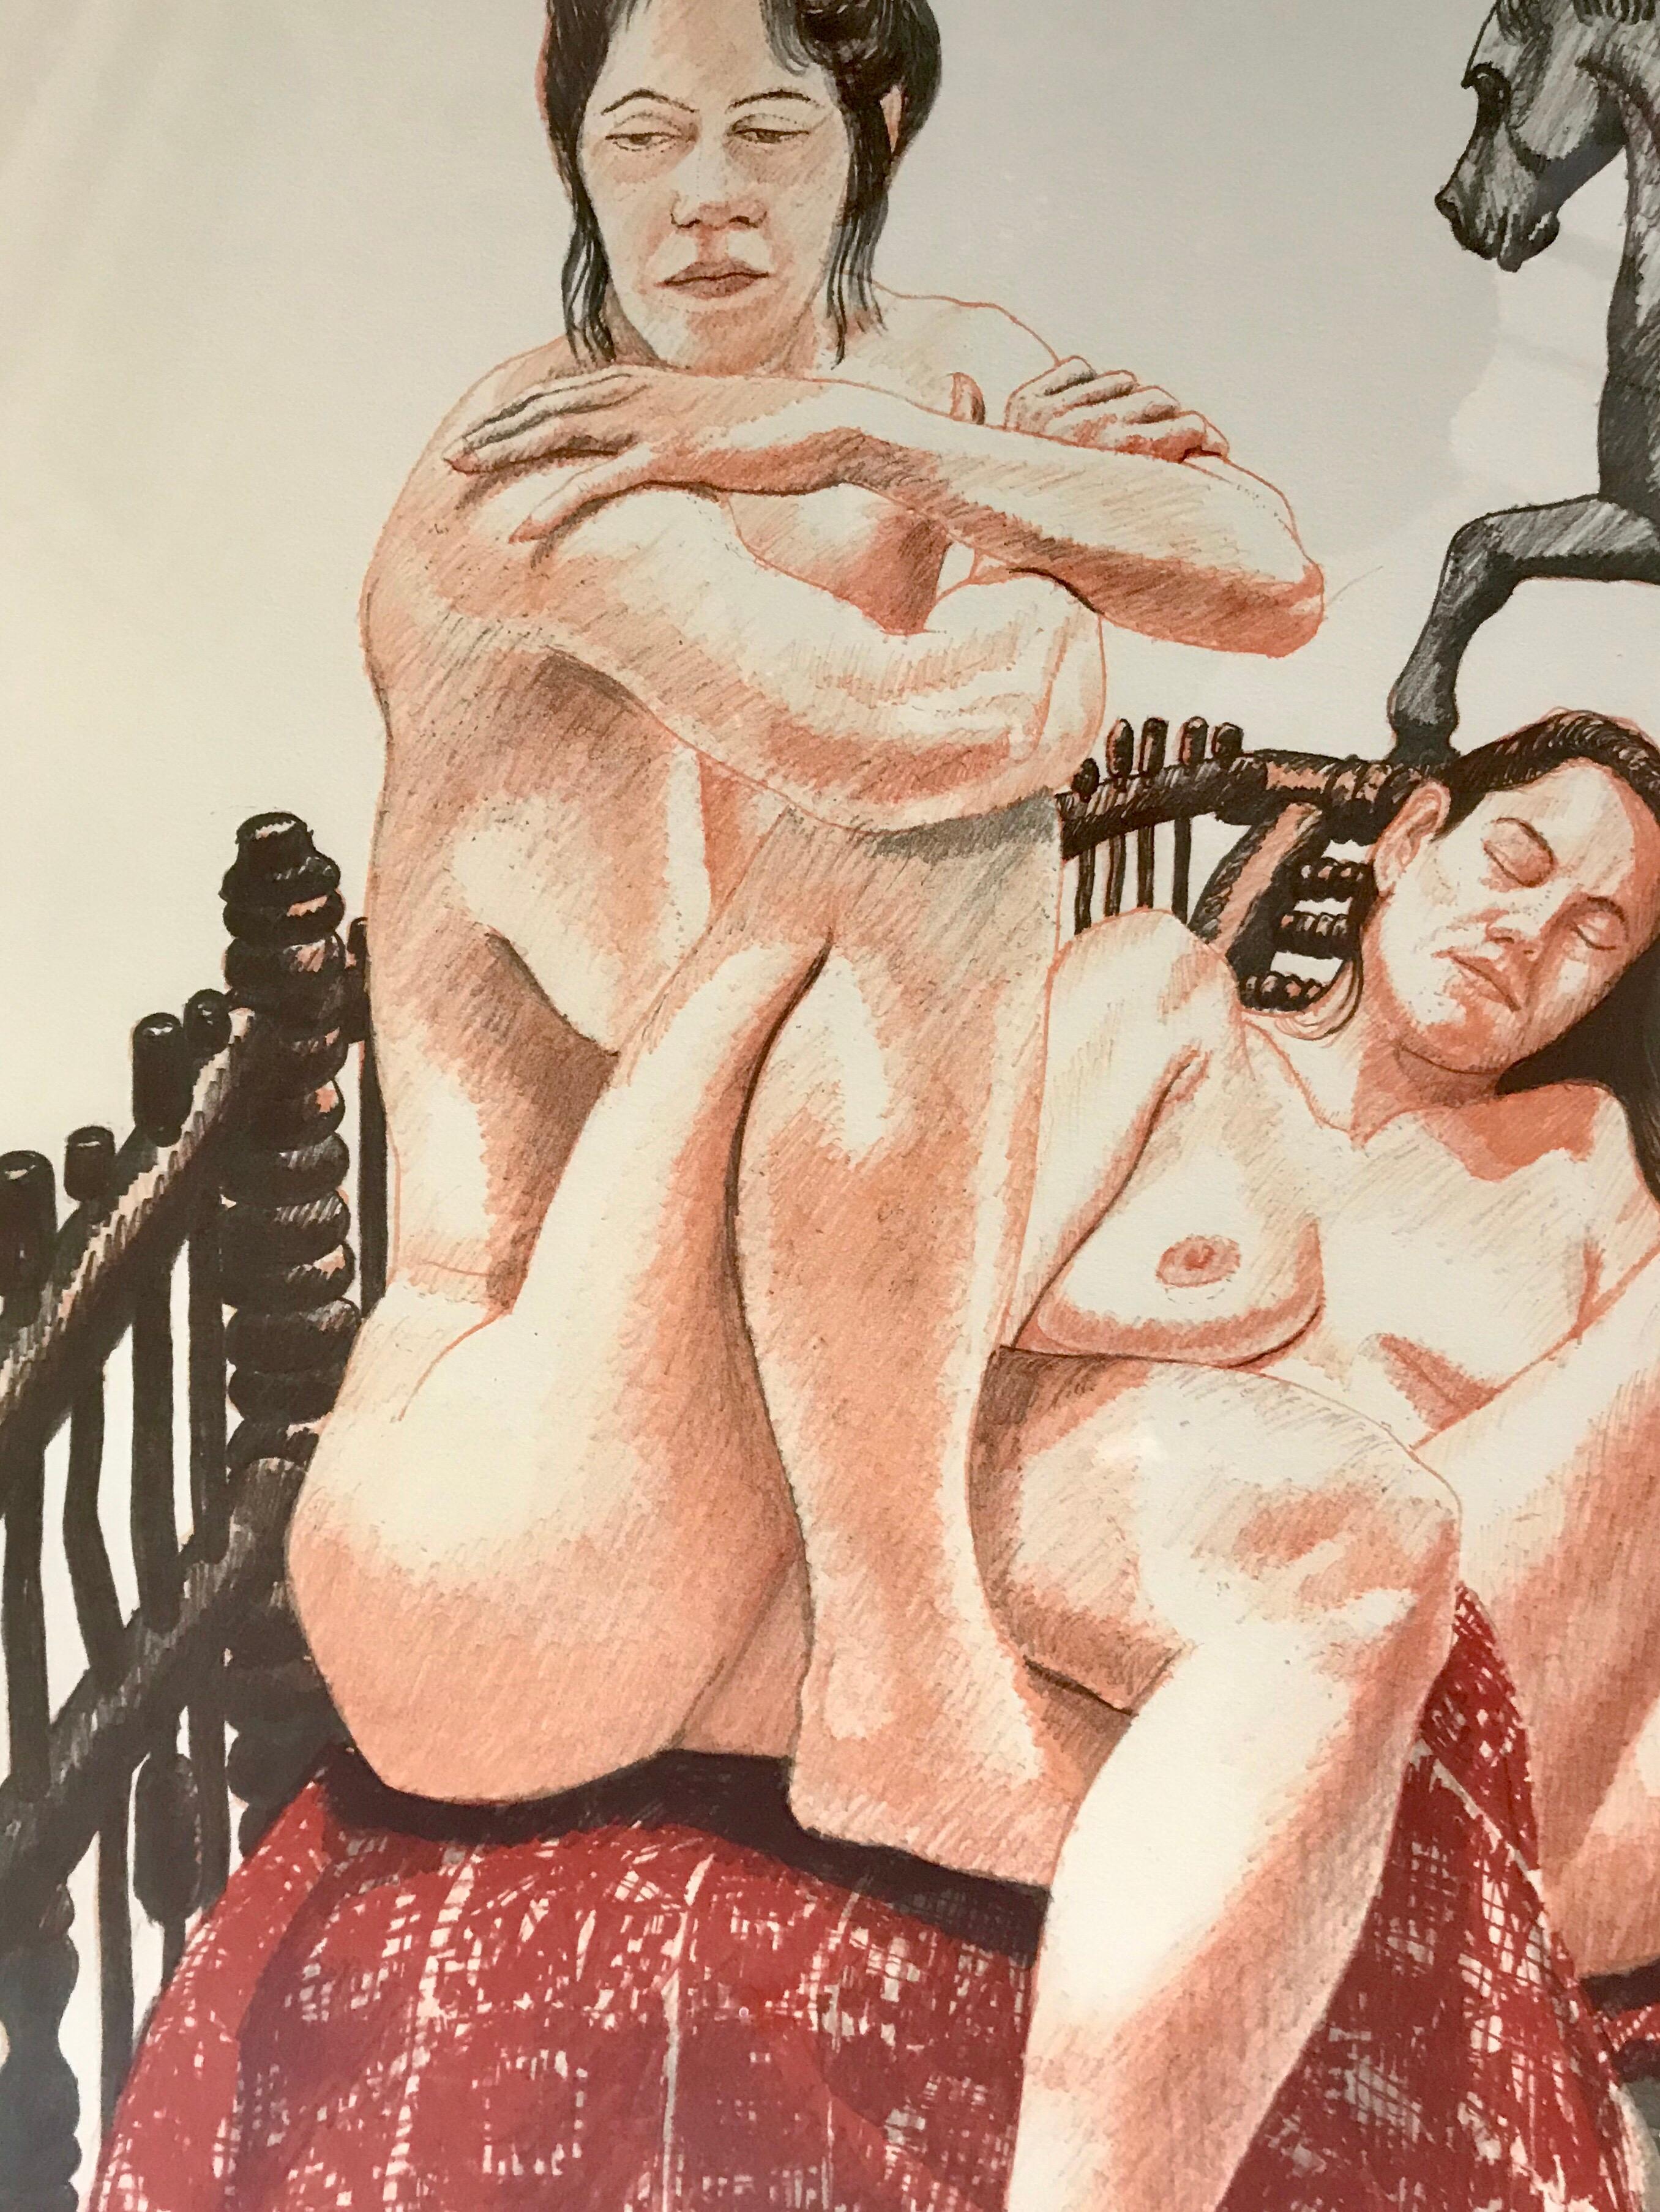 Artist: Philip Pearlstein
Title: Models and Horses
Year: 1992
Medium: Lithograph
Signed and numbered 74/140
Image size: 20.5 in. x 28 in.